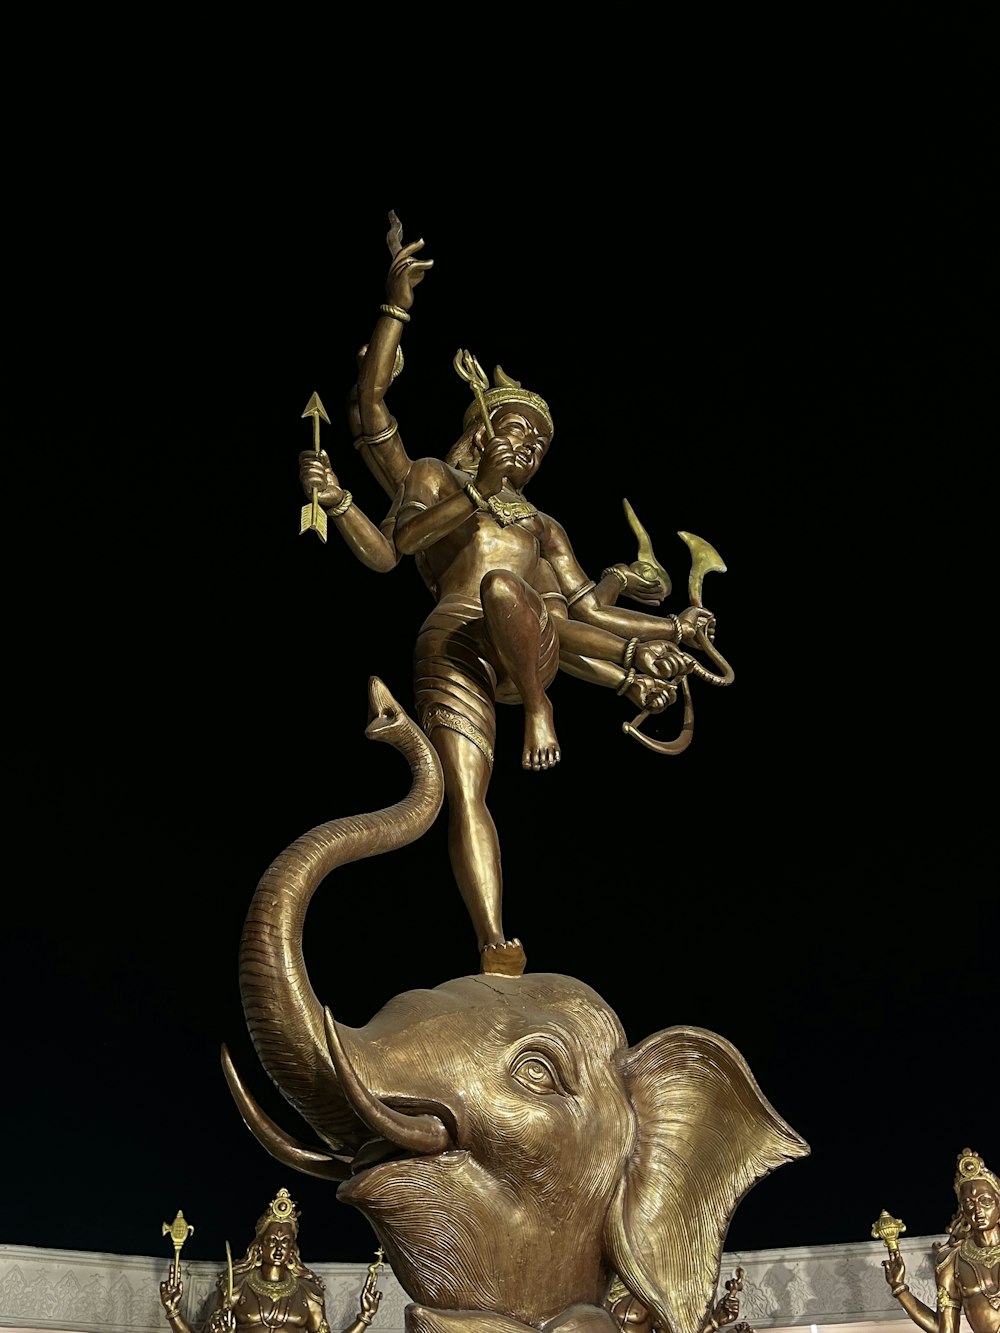 a statue of a man riding on top of an elephant